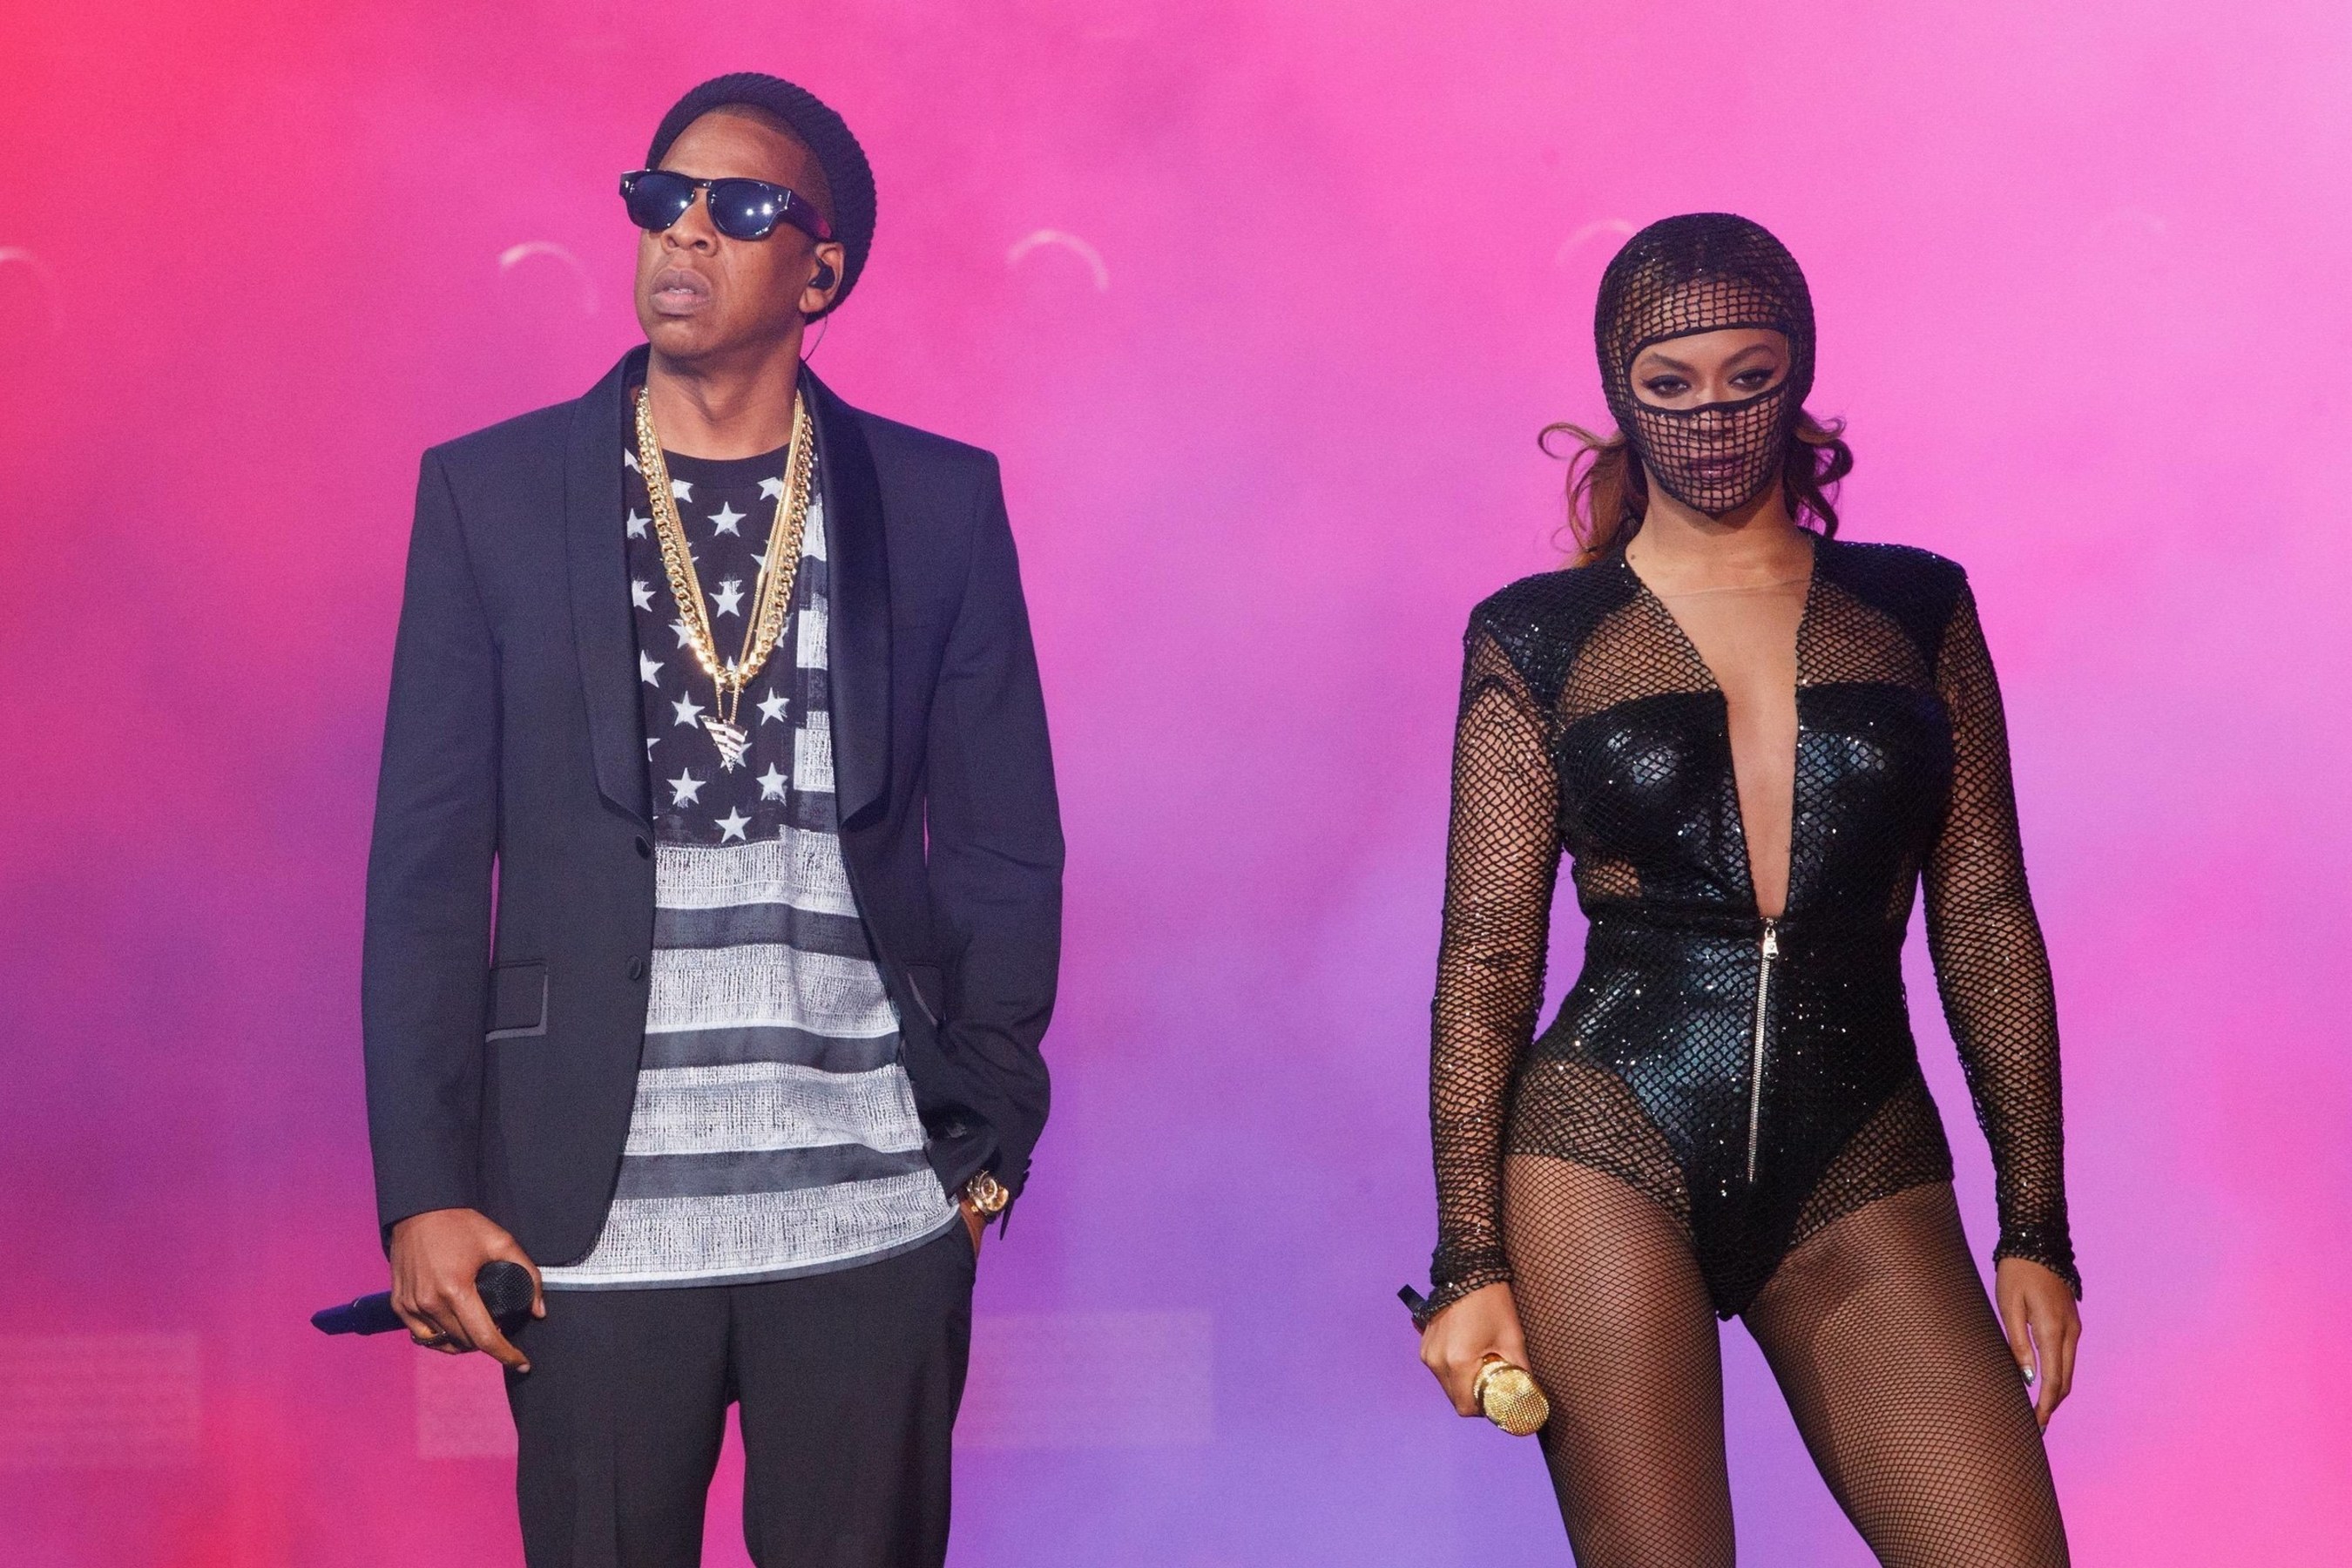 BEYONCE & JAY Z "ON THE RUN TOUR" EXCLUSIVELY IN PARIS FOR TWO FINAL SHOWS. (PRNewsFoto/Live Nation Entertainment)